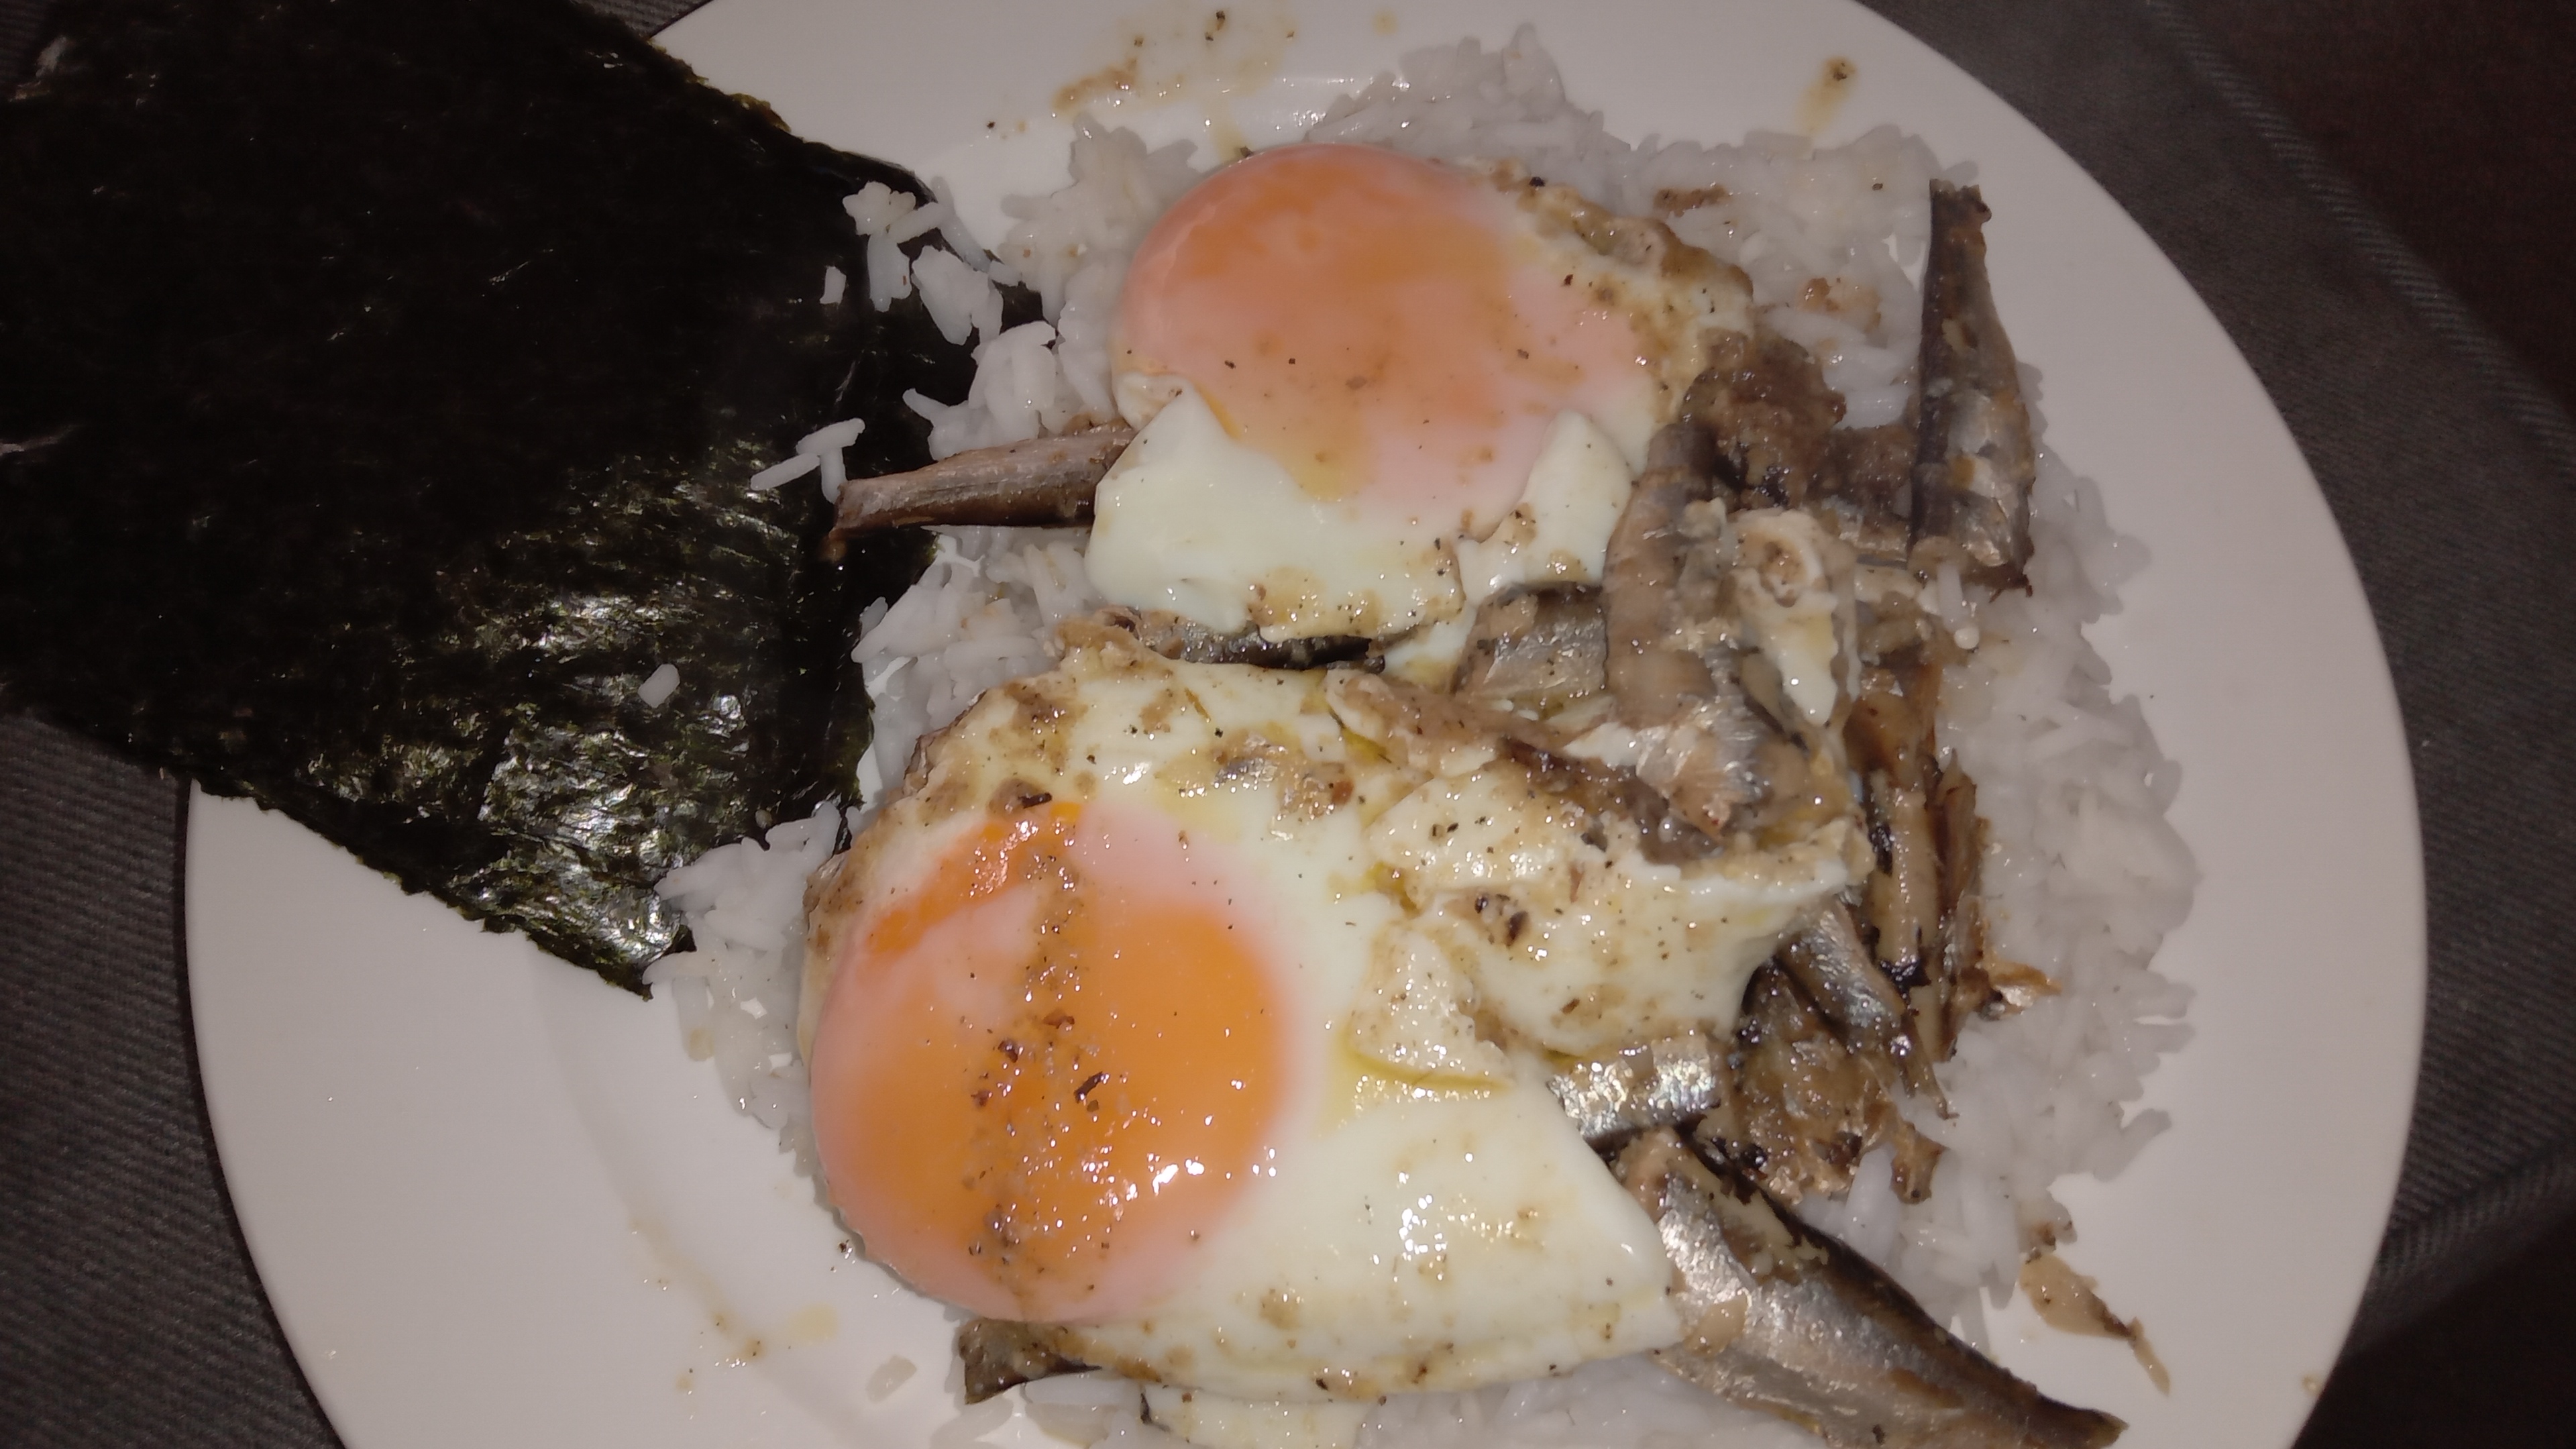 plate of rice, fried eggs and sardines, wish pieces of Nori sheets on the side